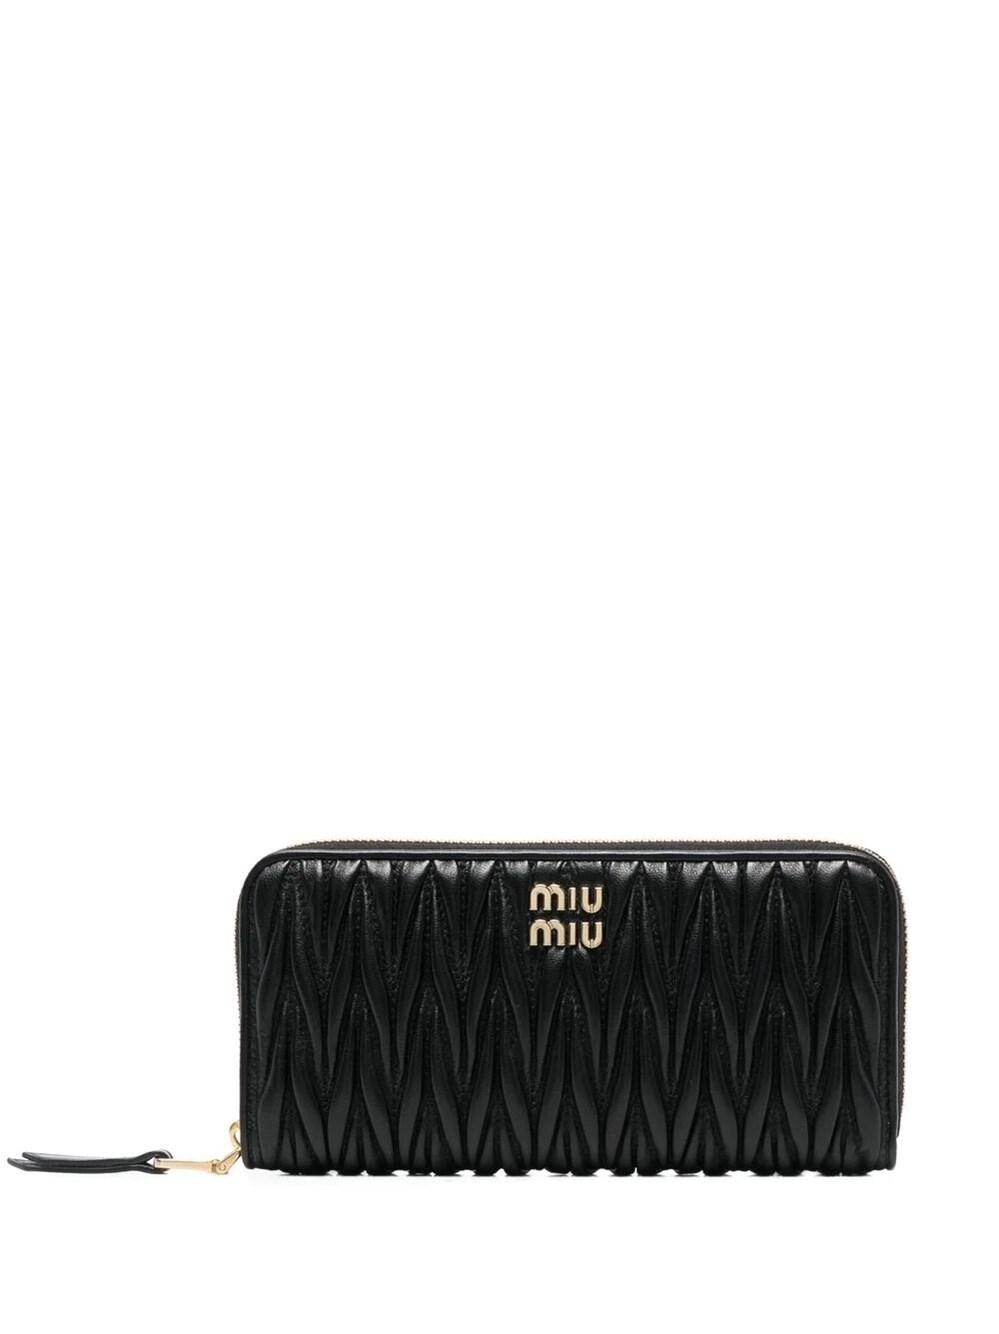 Miu Miu Logo-plaque Quilted Leather Wallet in Black | Lyst